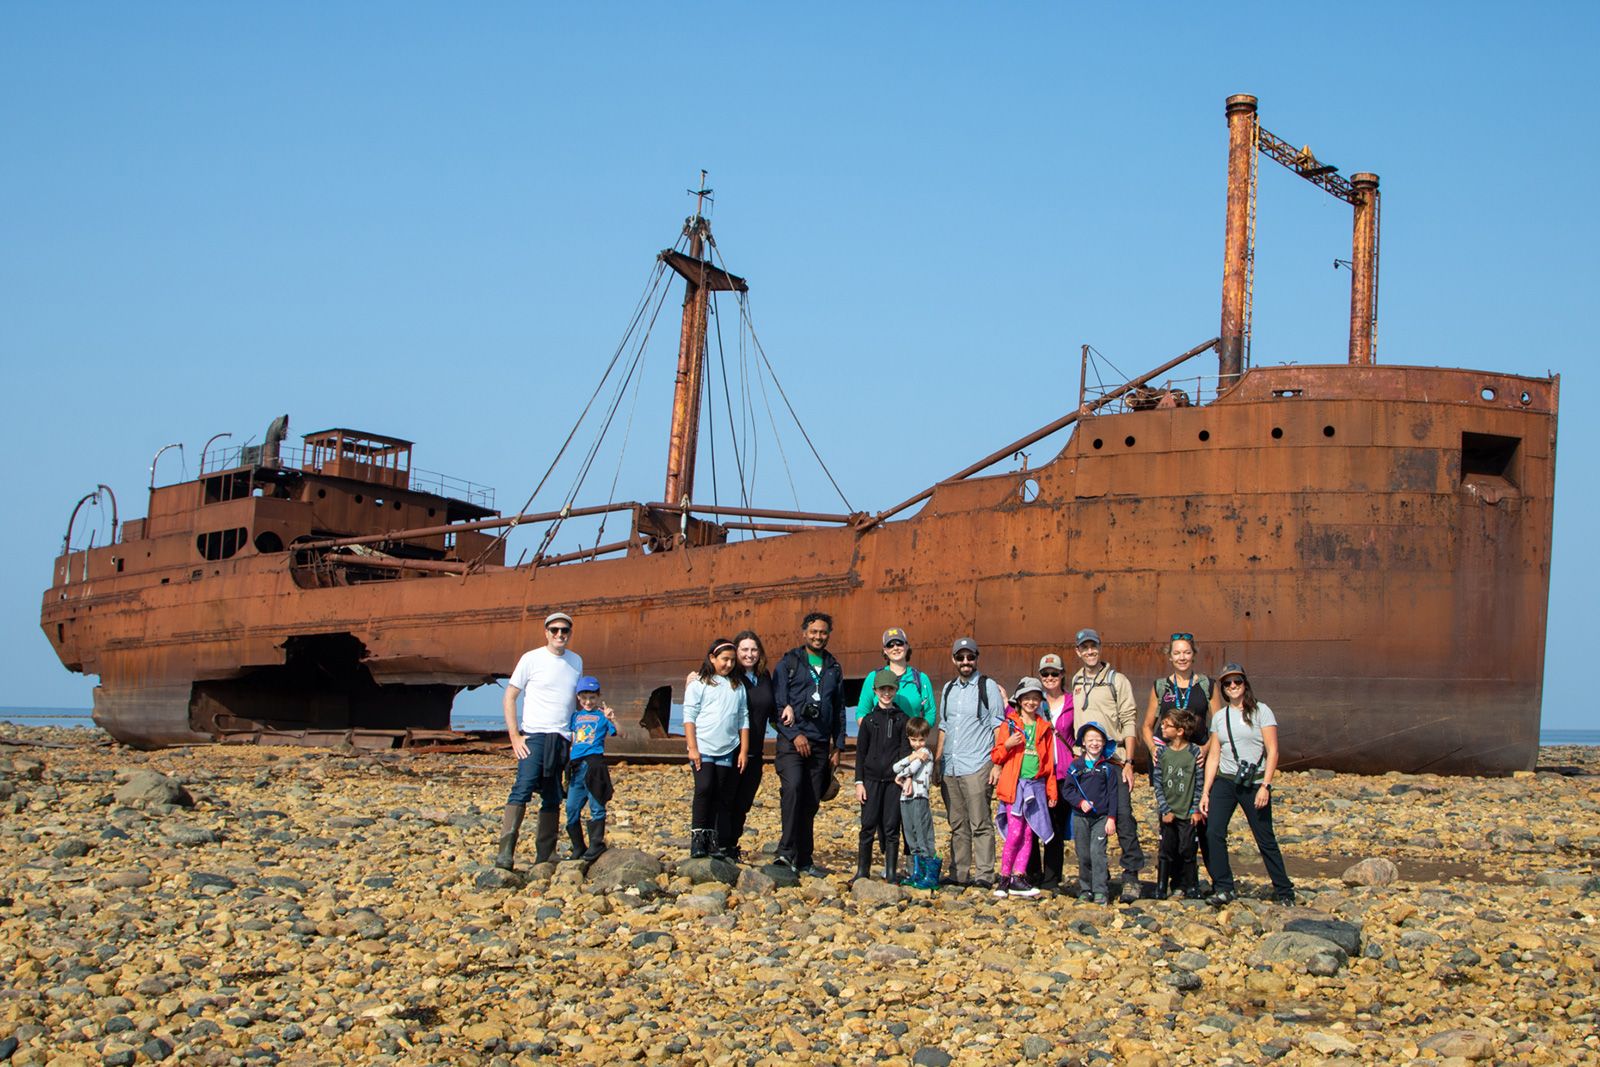 A group of parents and children on a tour with Frontiers North Adventures walks to the wreck of the Ithaca.